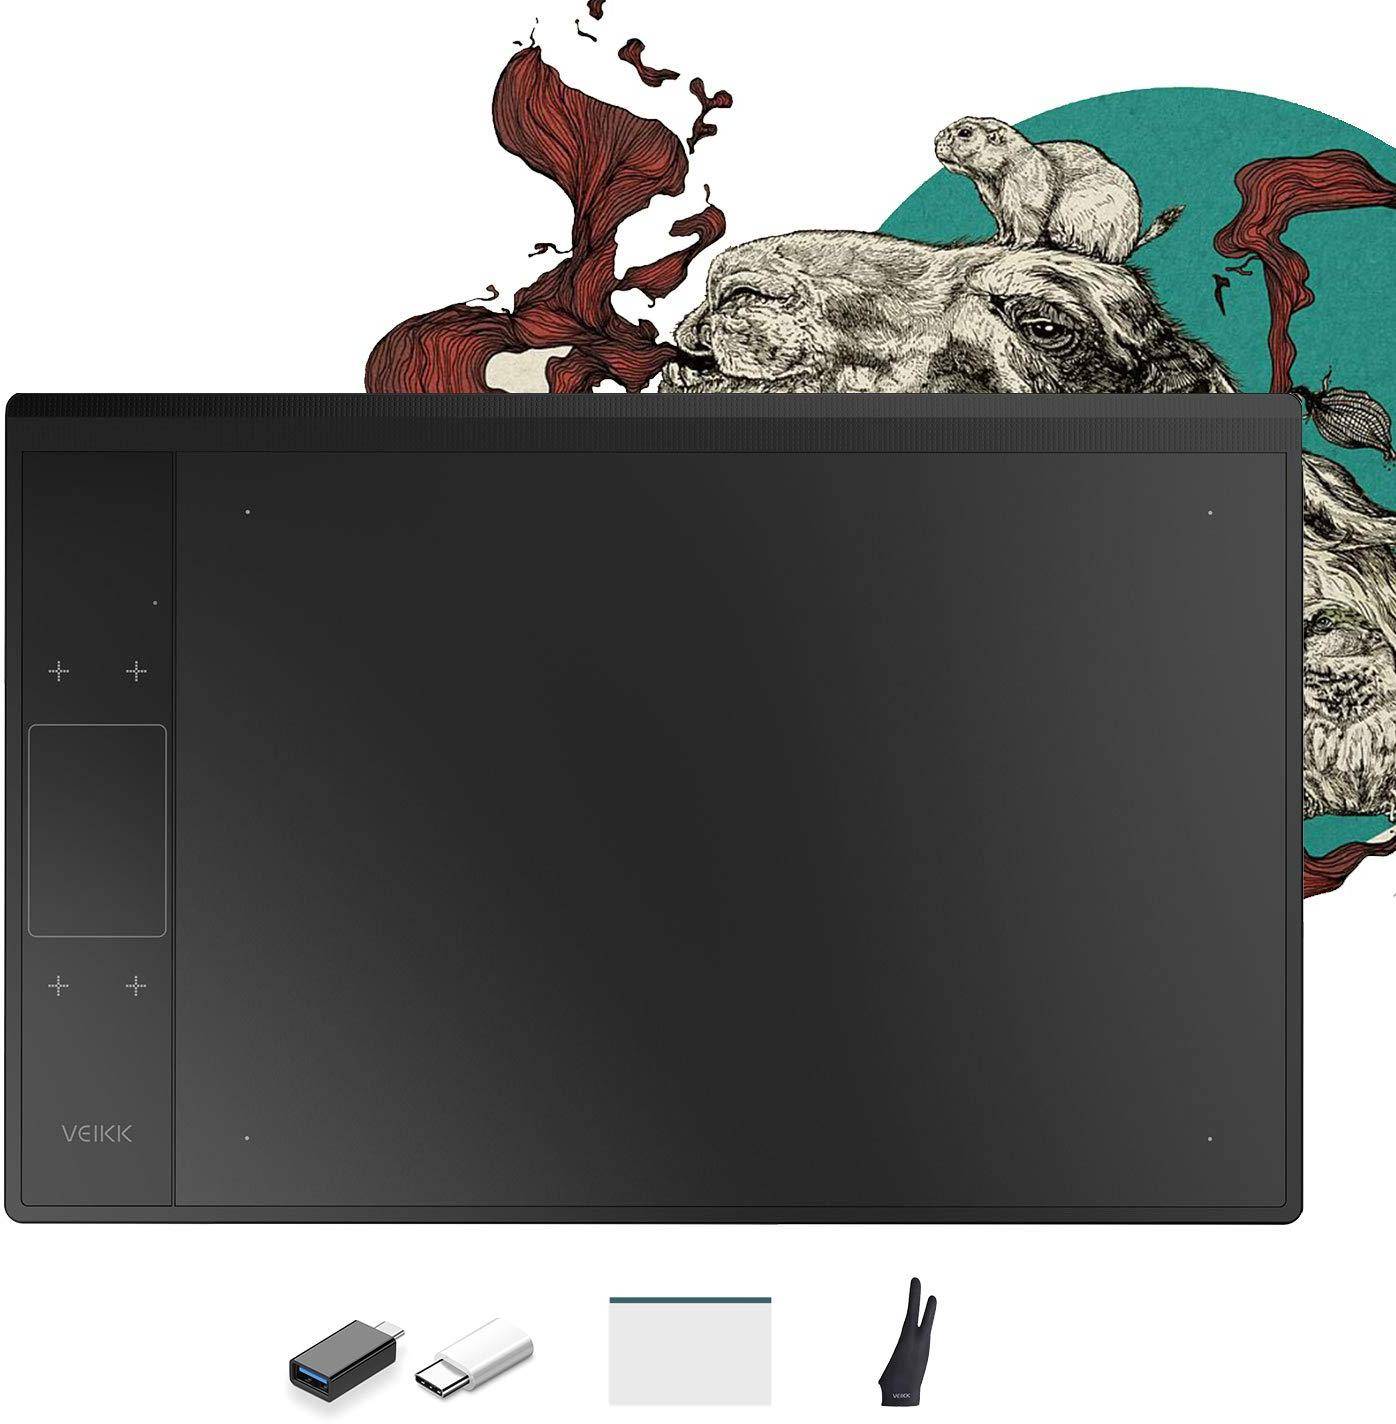 VEIKK A30 10x6 Inch Graphic Tablet zoom image